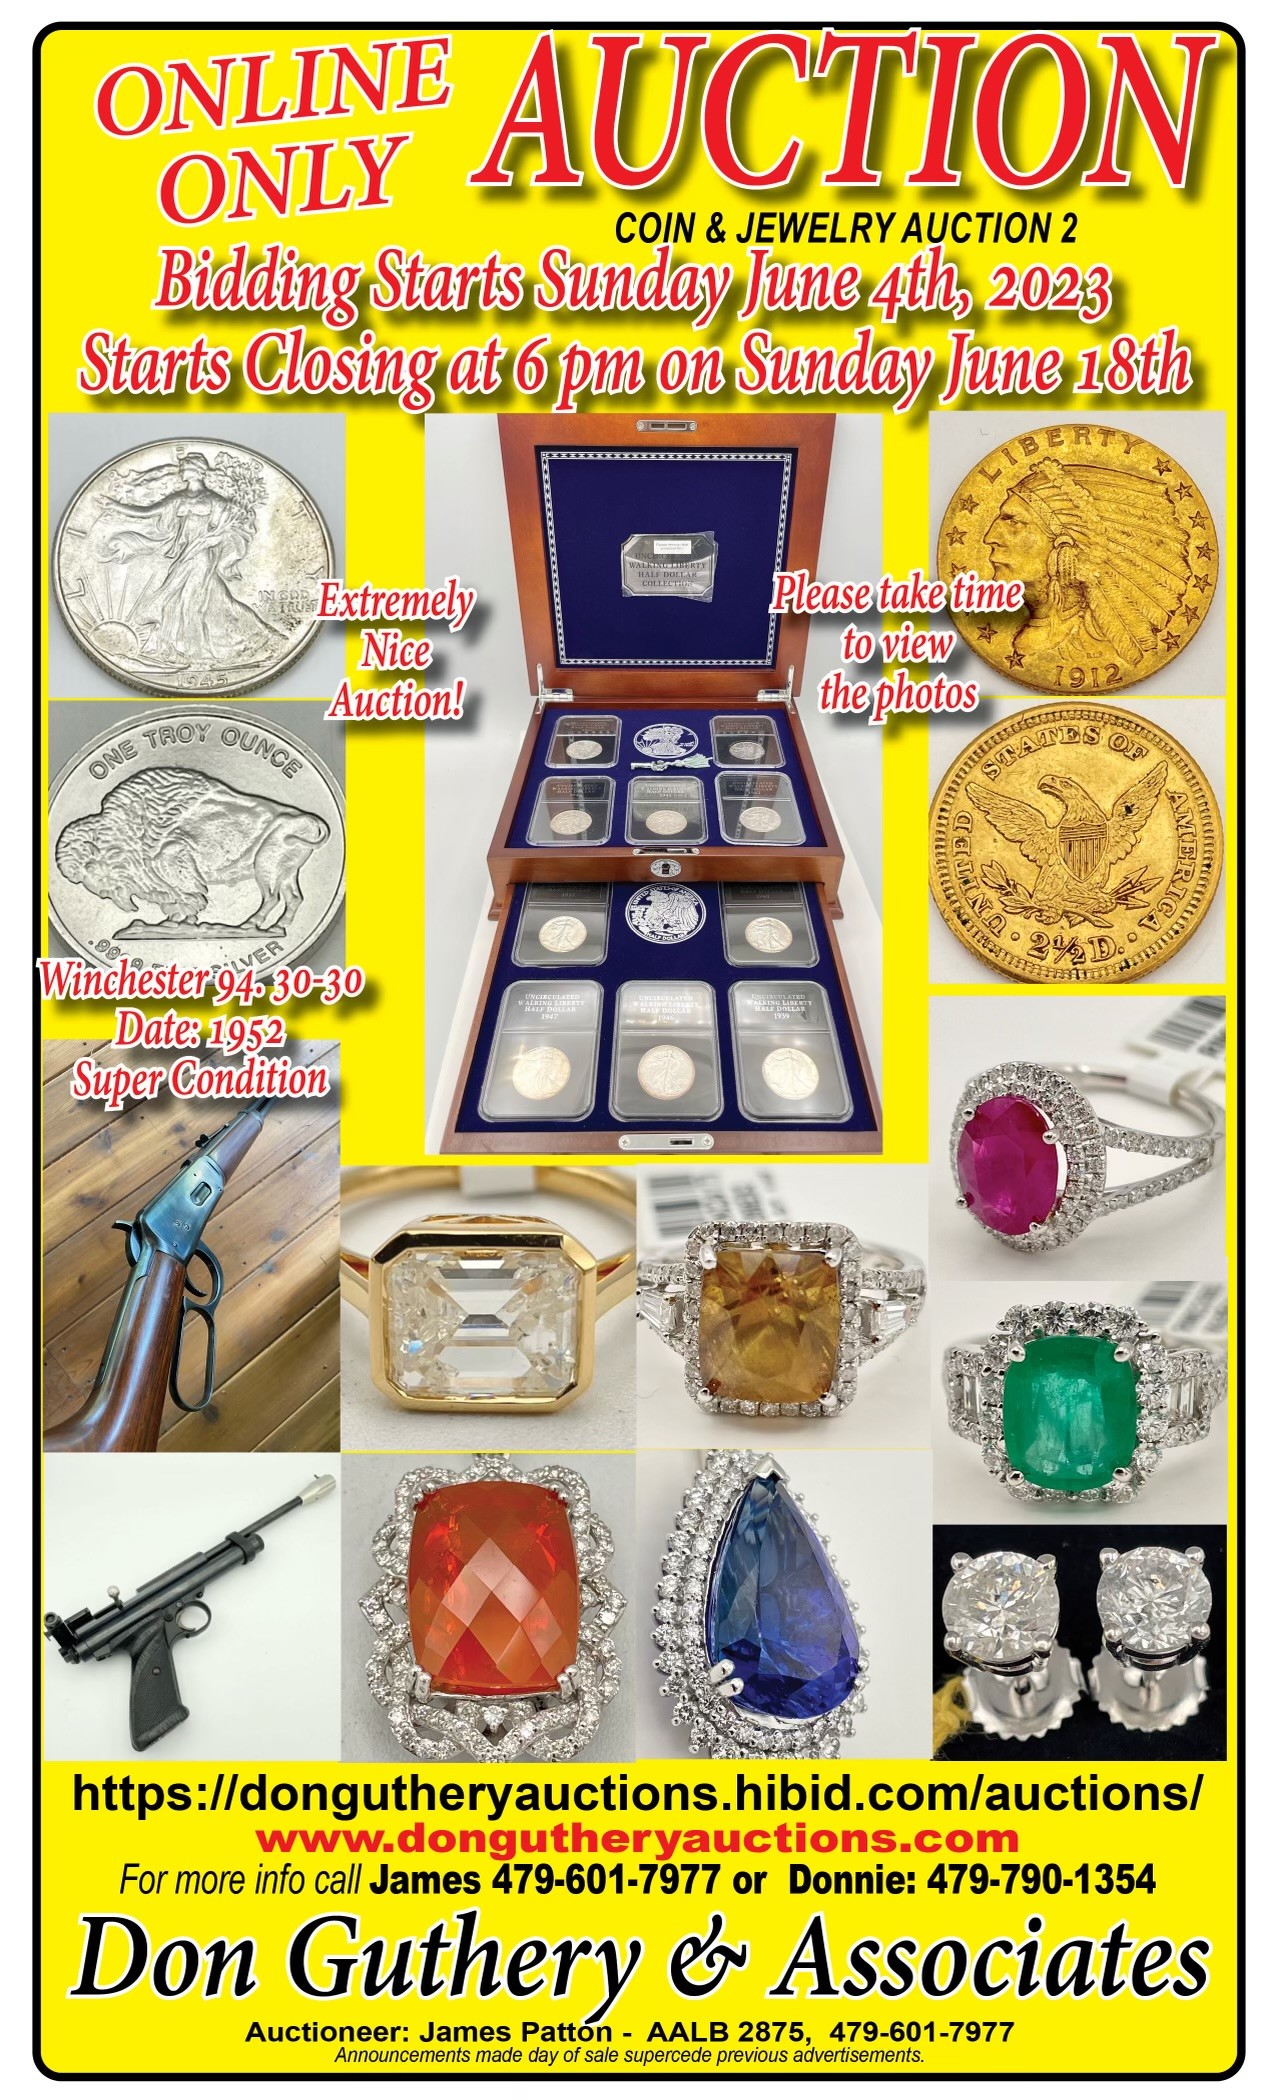 Bidding Closed! Gallery Auction: Firearms, Sterling, Gold, Jewelry, Coins,  Art, Shortwave, Fishing, Collectibles & More! - ByceAUCTION LTD. Ohio  Auctioneer #2006000019